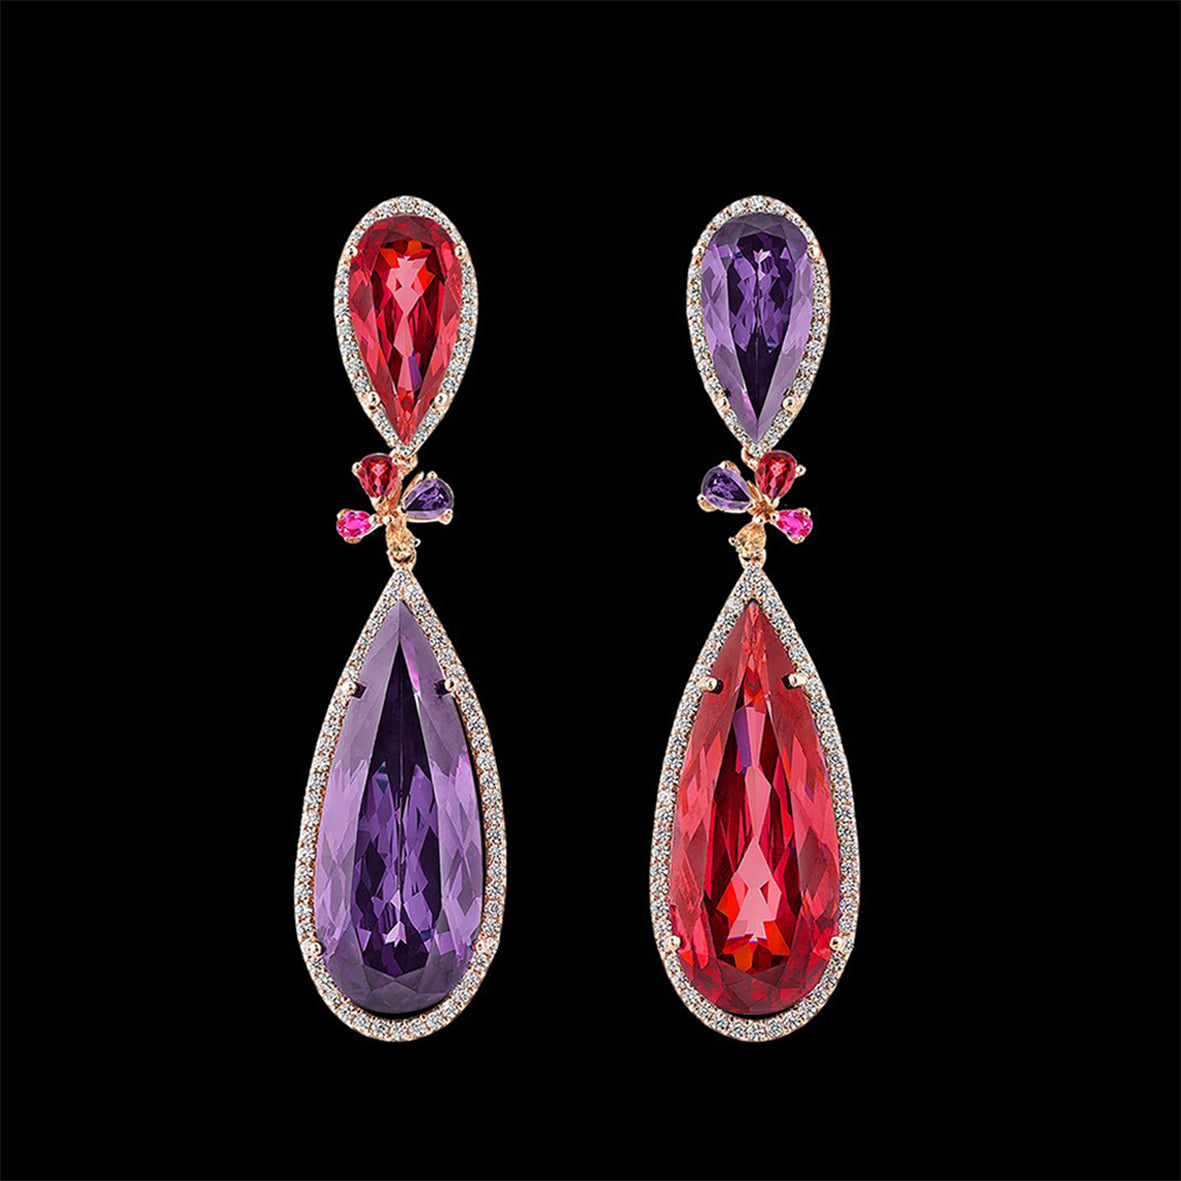 Ruby Amethyst Papillon Earrings, Earring, Anabela Chan Joaillerie - Fine jewelry with laboratory grown and created gemstones hand-crafted in the United Kingdom. Anabela Chan Joaillerie is the first fine jewellery brand in the world to champion laboratory-grown and created gemstones with high jewellery design, artisanal craftsmanship and a focus on ethical and sustainable innovations.